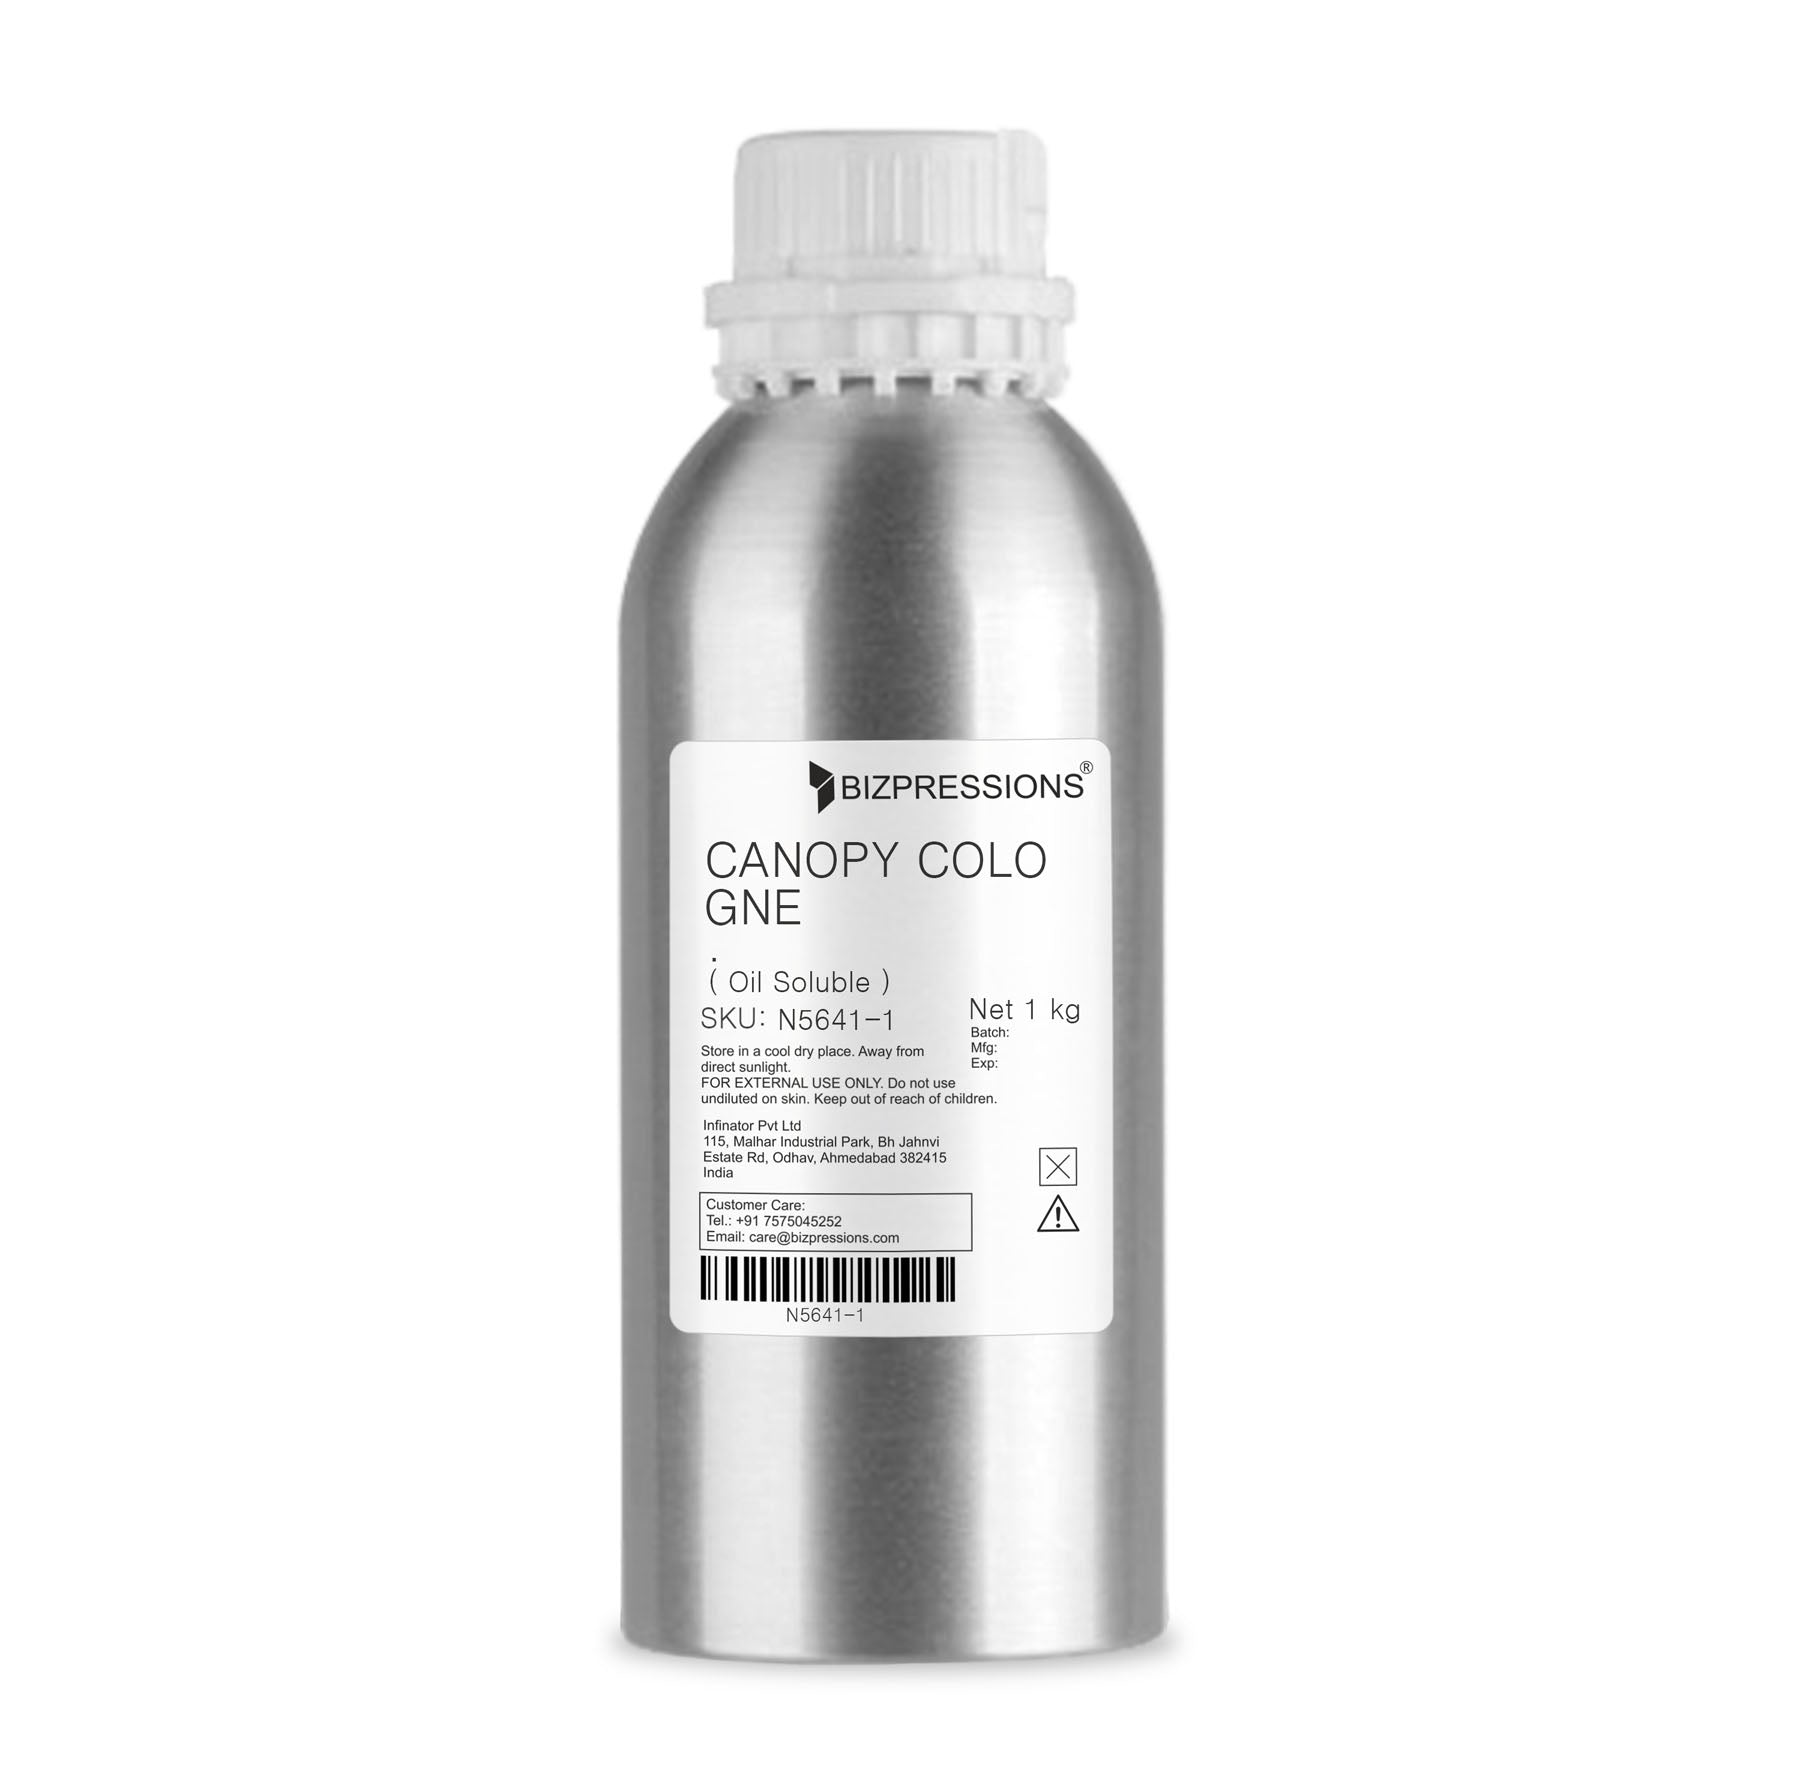 CANOPY COLOGNE - Fragrance ( Oil Soluble ) - 1 kg